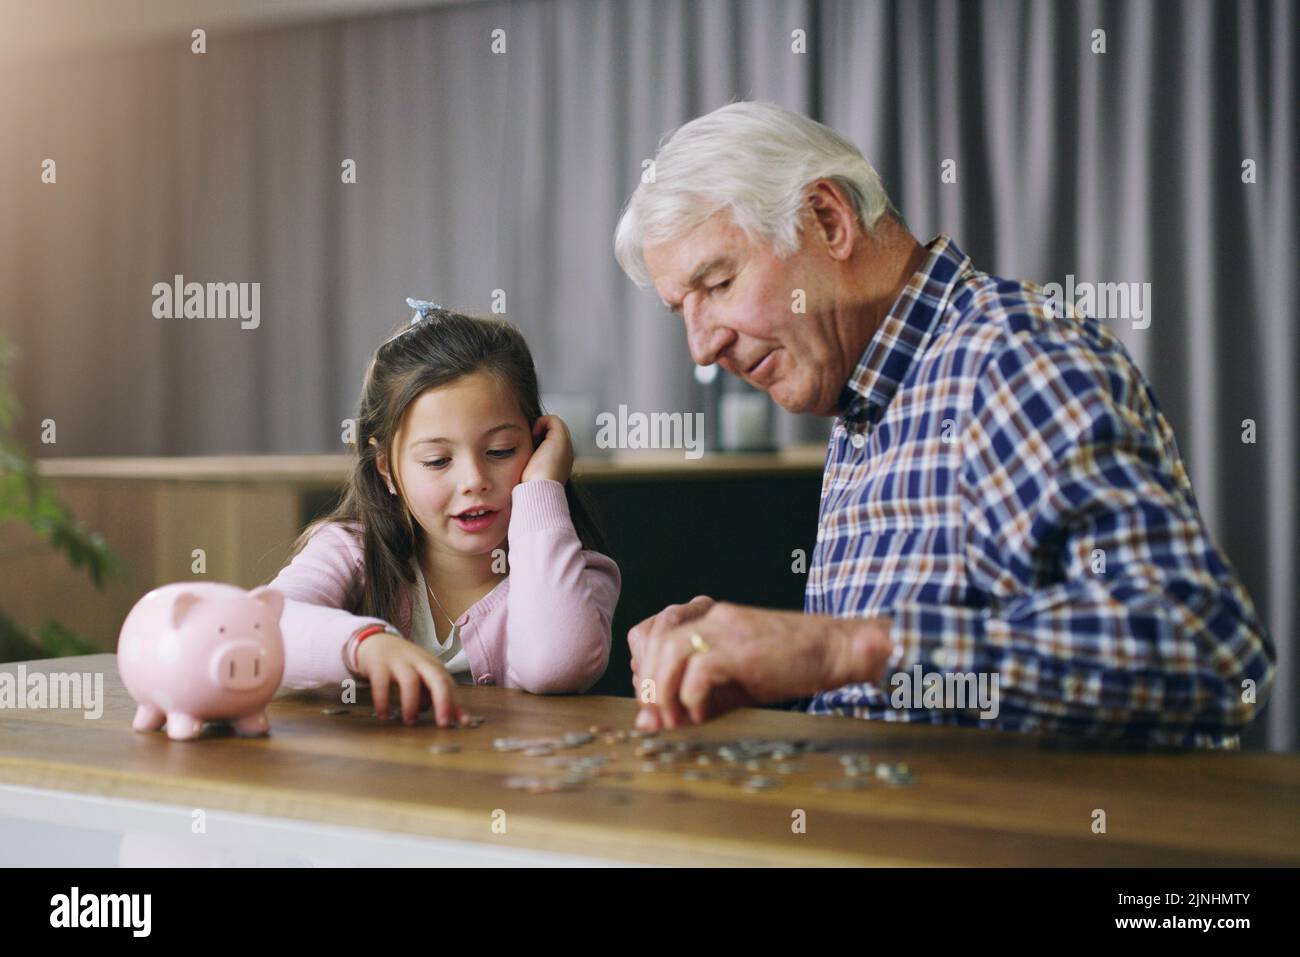 One day itll grow into a big money tree. a little girl learning about money from her grandfather. Stock Photo